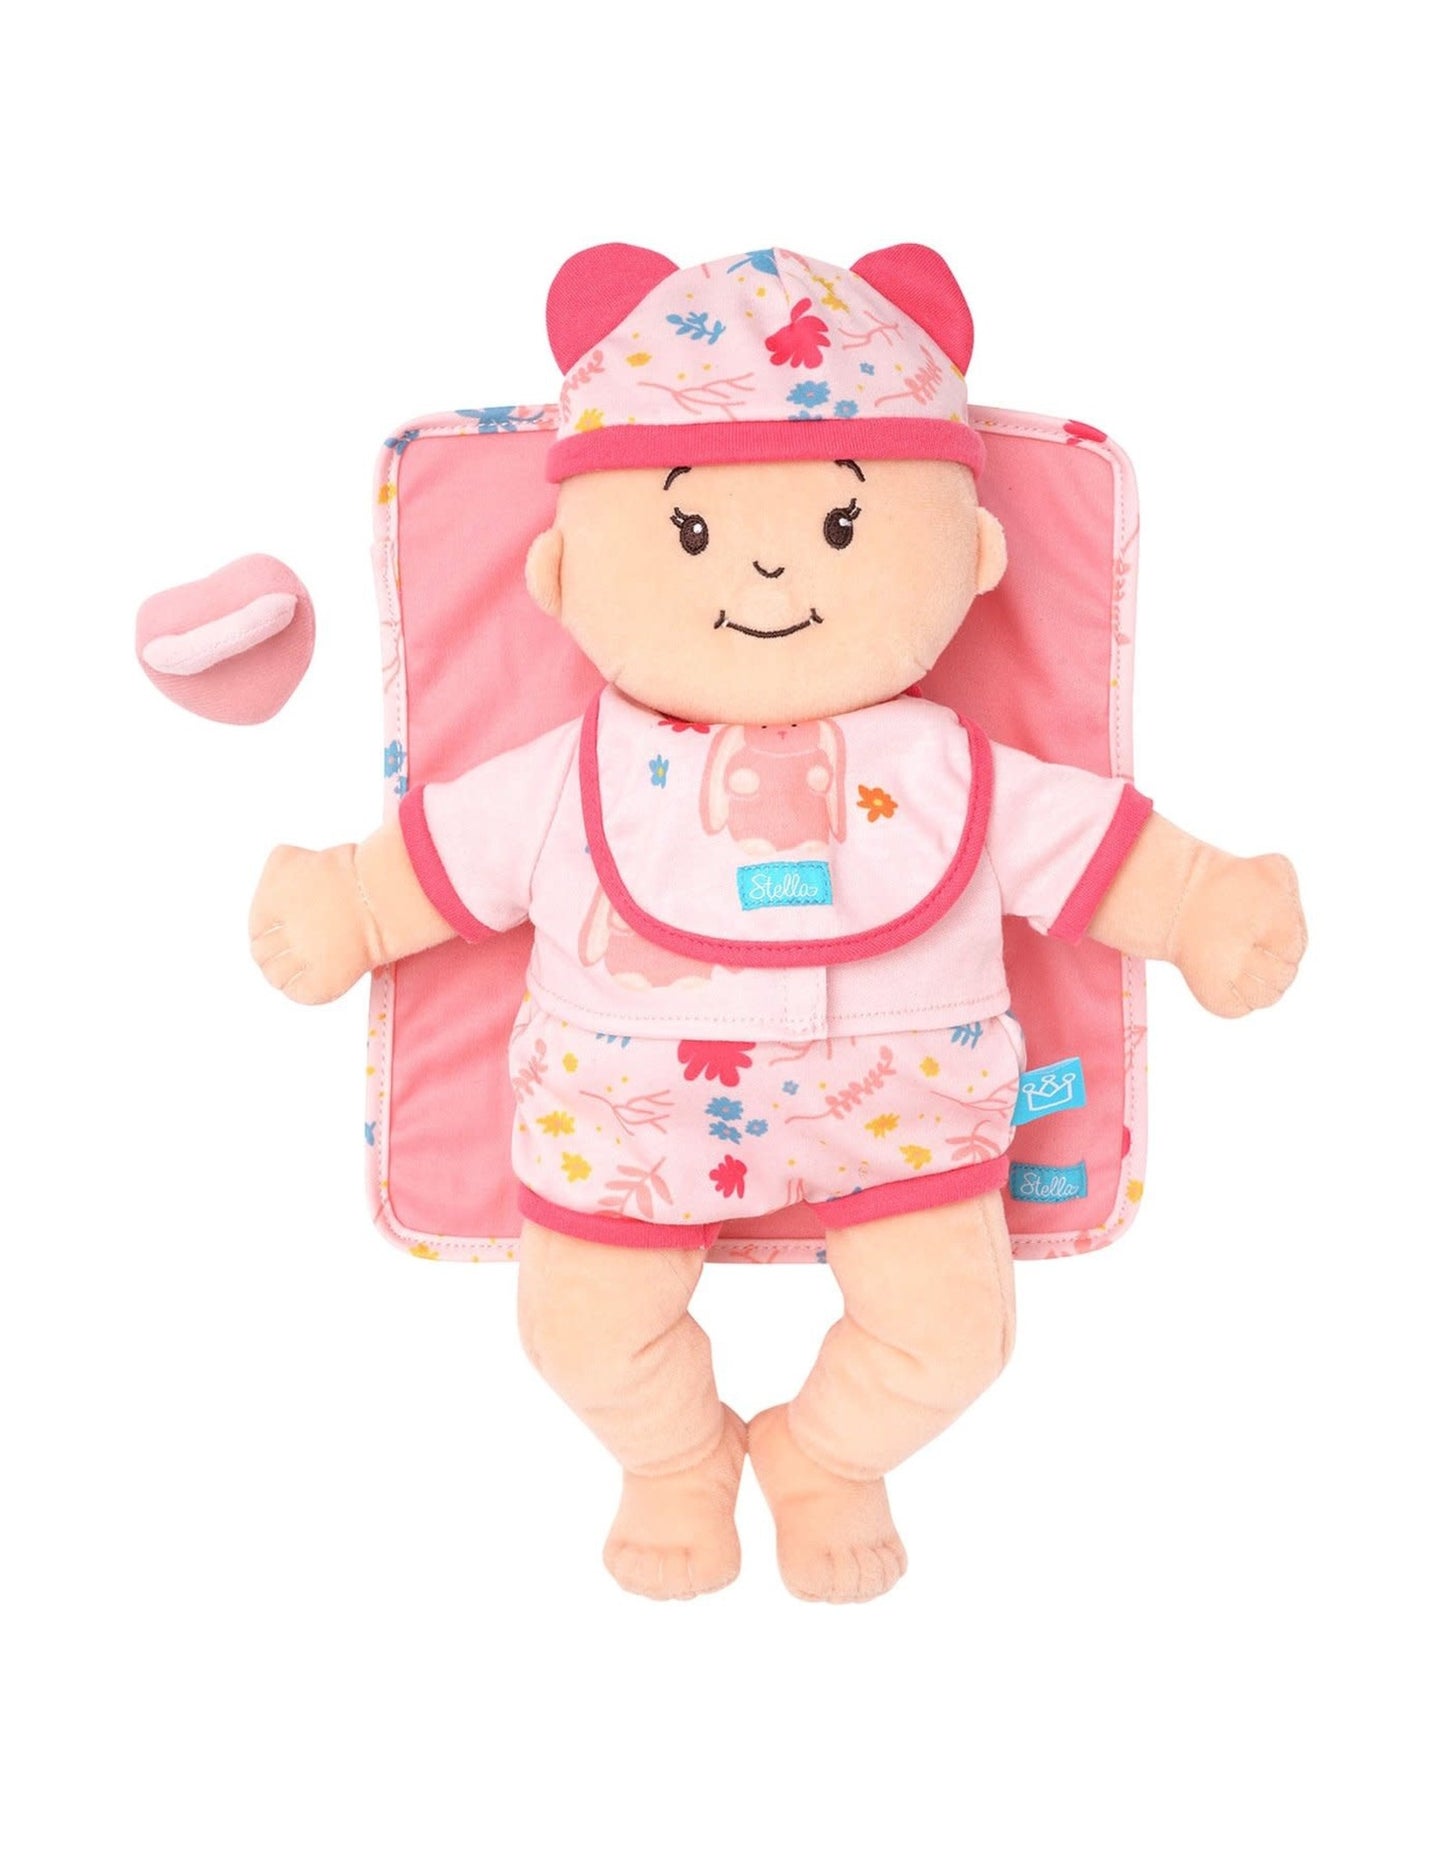 Baby Stella Welcome Baby Accessory Set